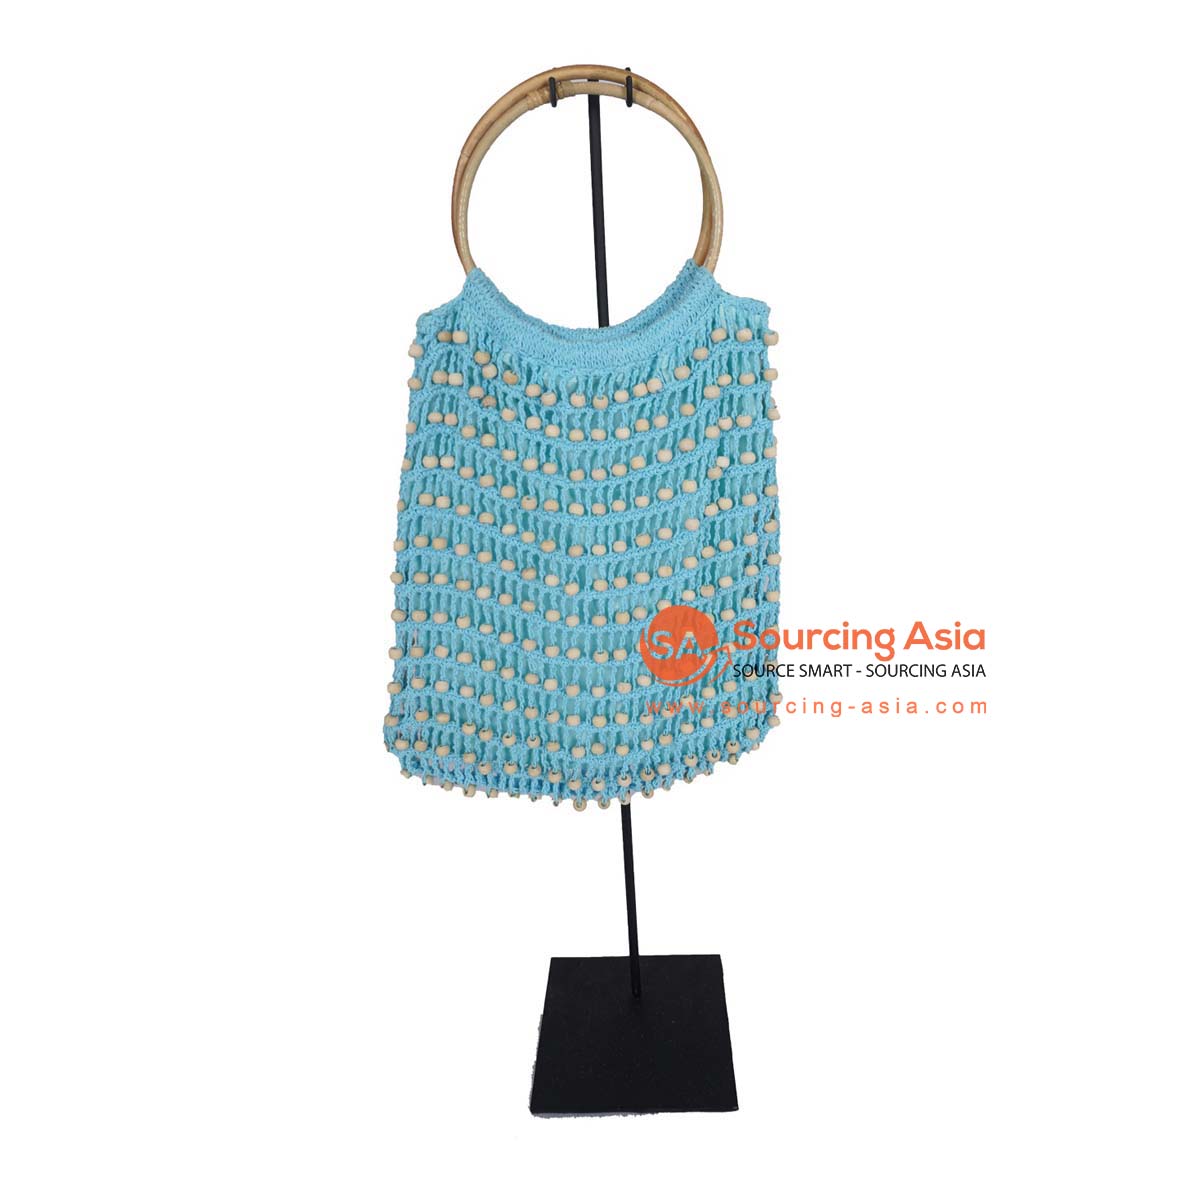 HBSC274-1 BLUE COTTON CLOTH AND BEADS BAG